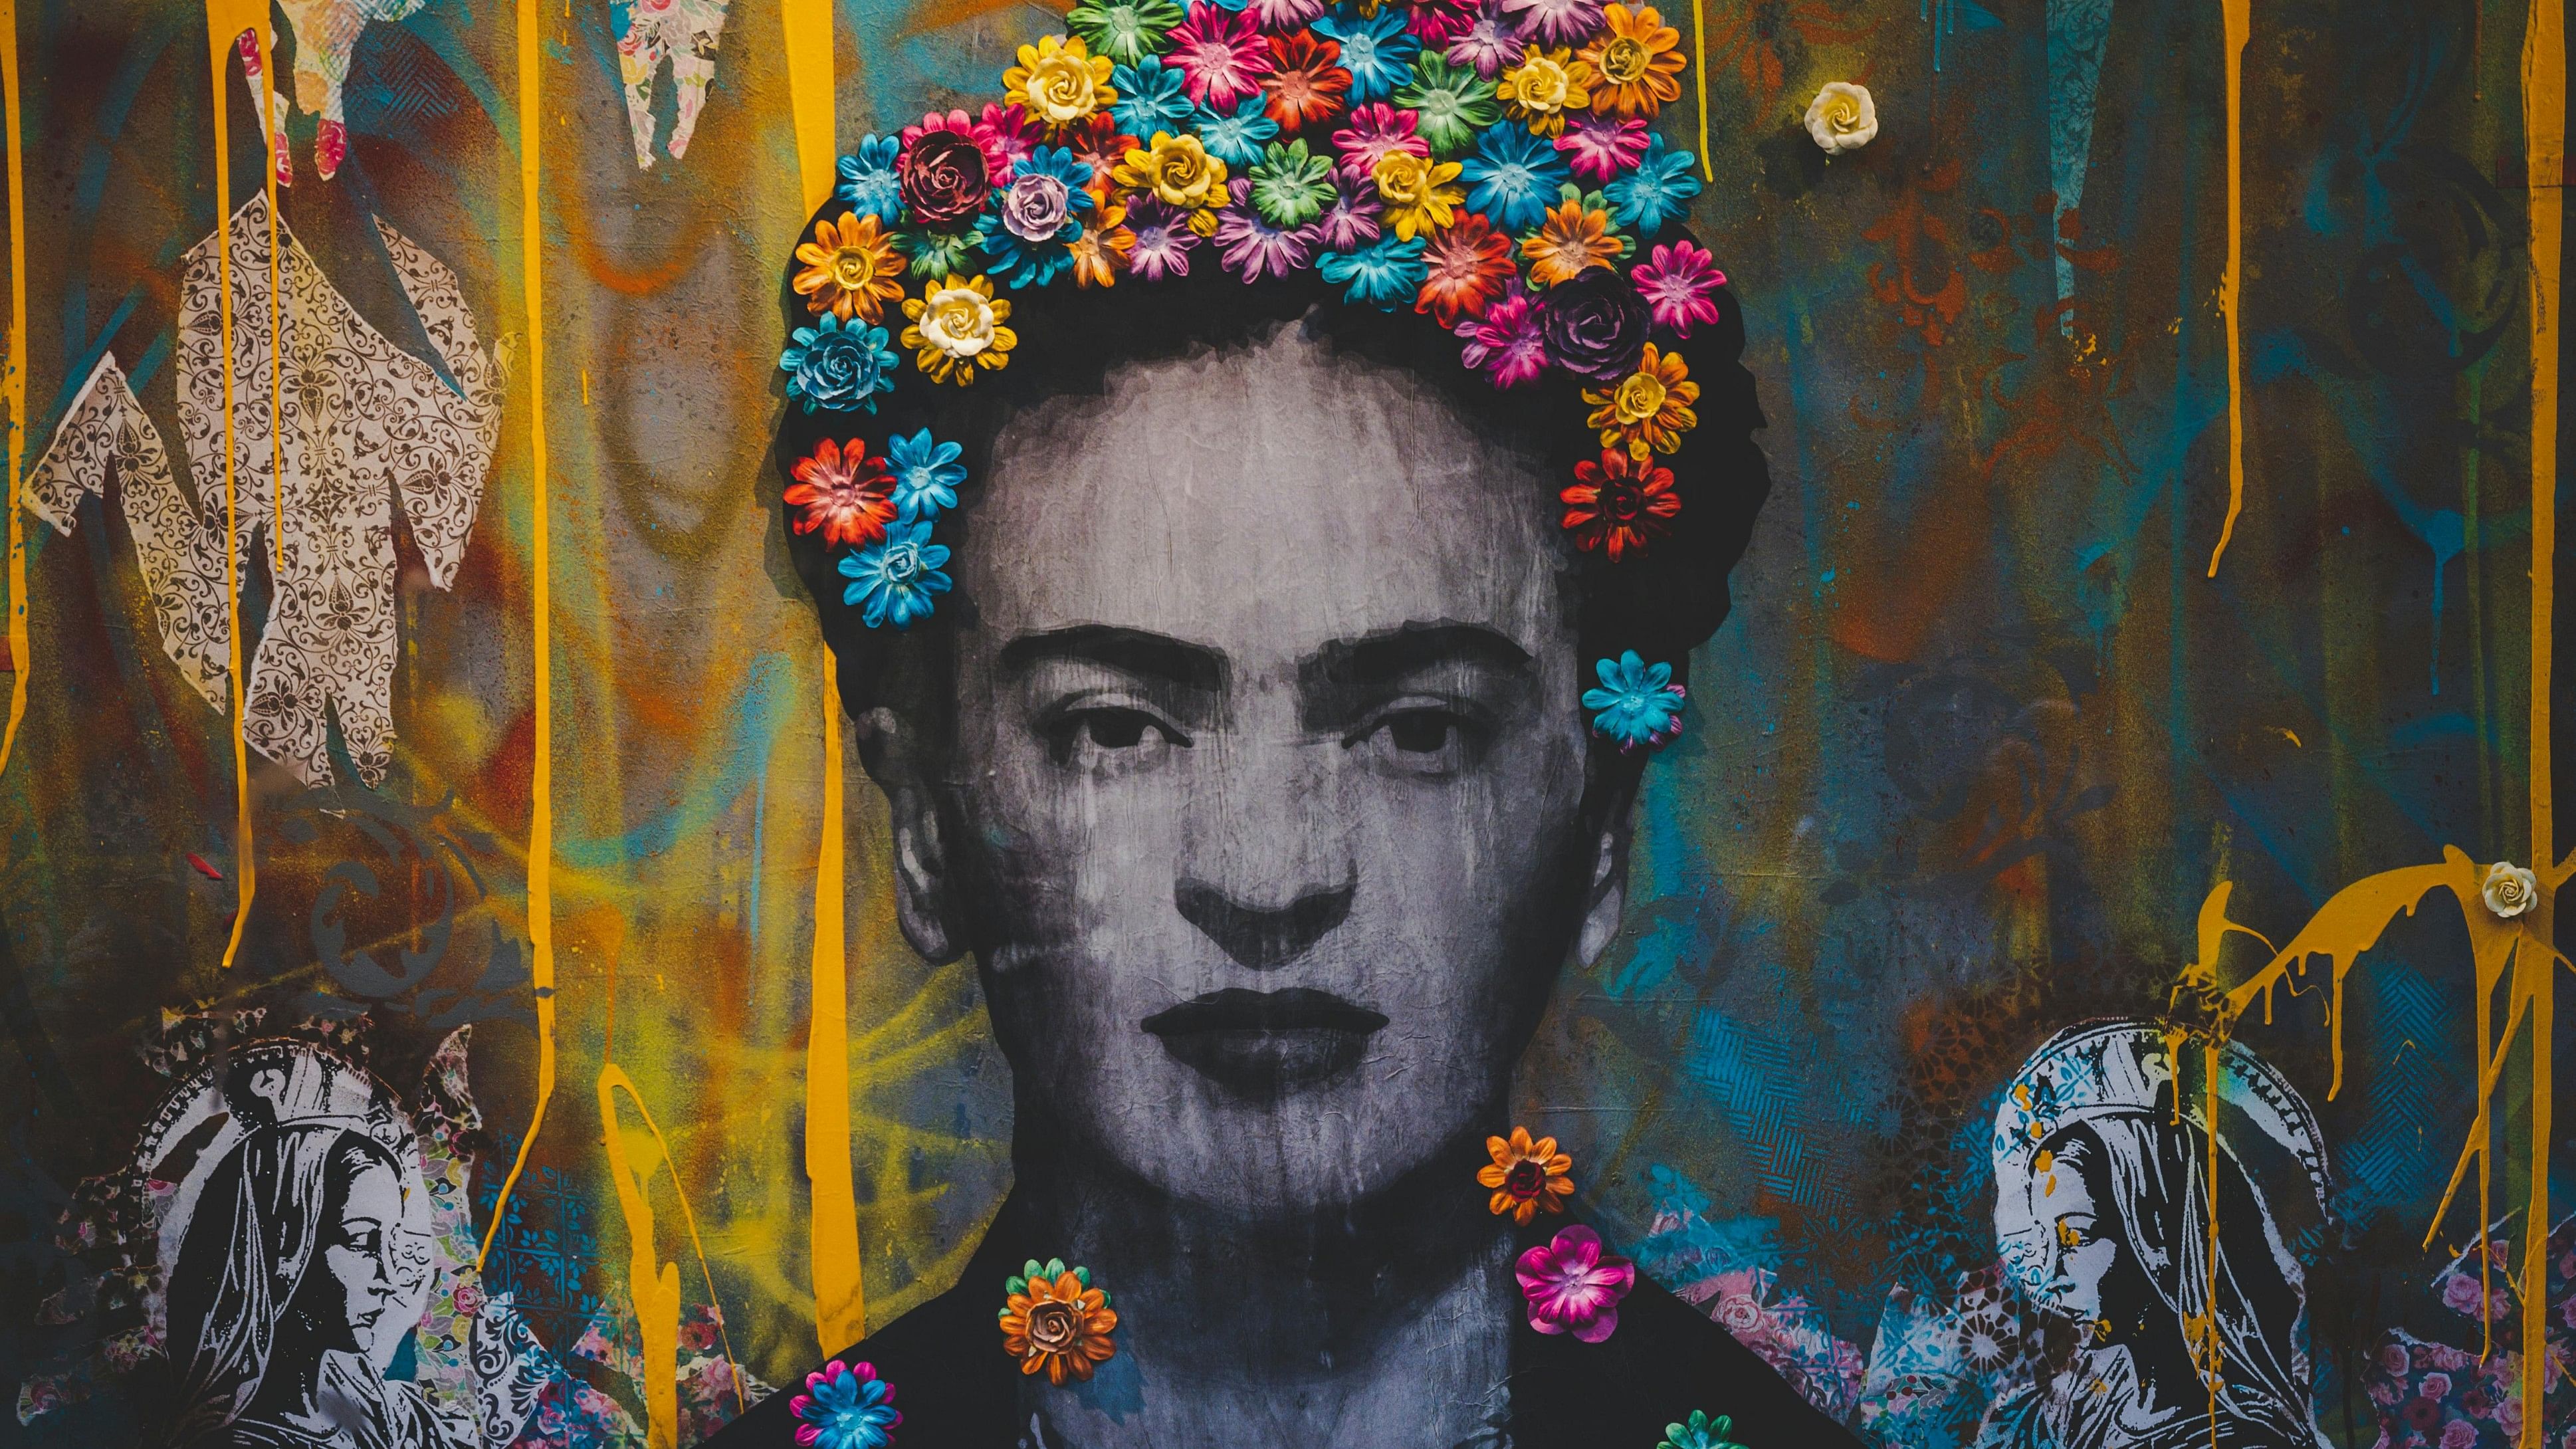 <div class="paragraphs"><p>A creative graffiti wall art with the portrait of Frida Kahlo who, like Simone de Beauvoir, was a feminist icon. They both challenged traditional gender roles.&nbsp;</p></div>